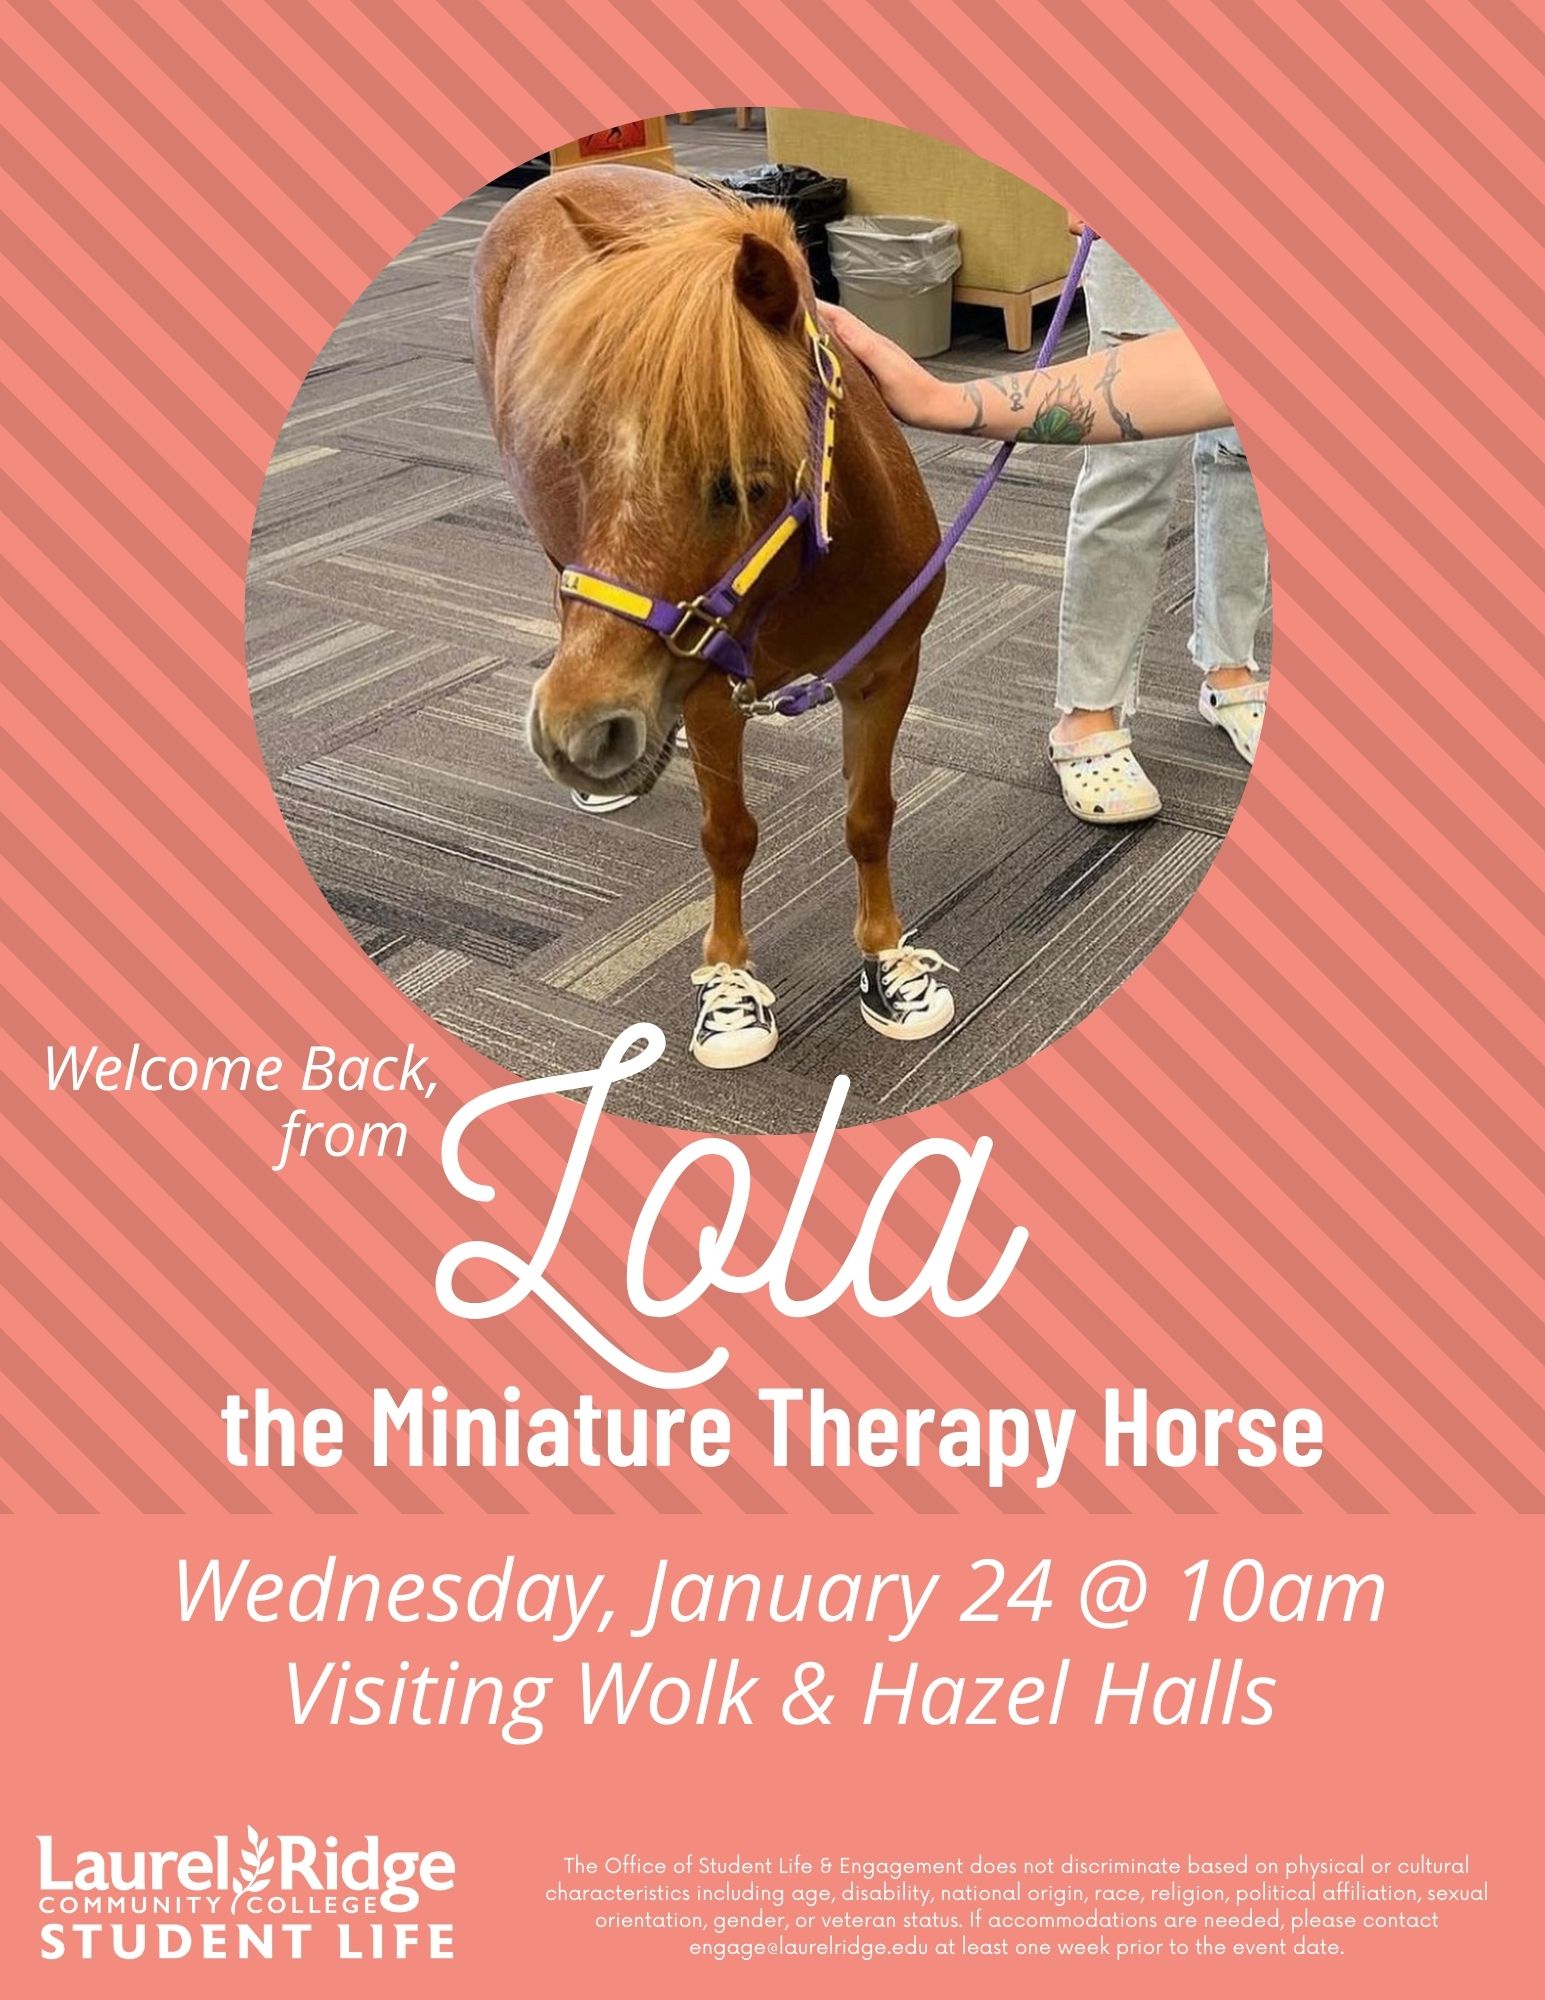 Lola the Therapy Horse